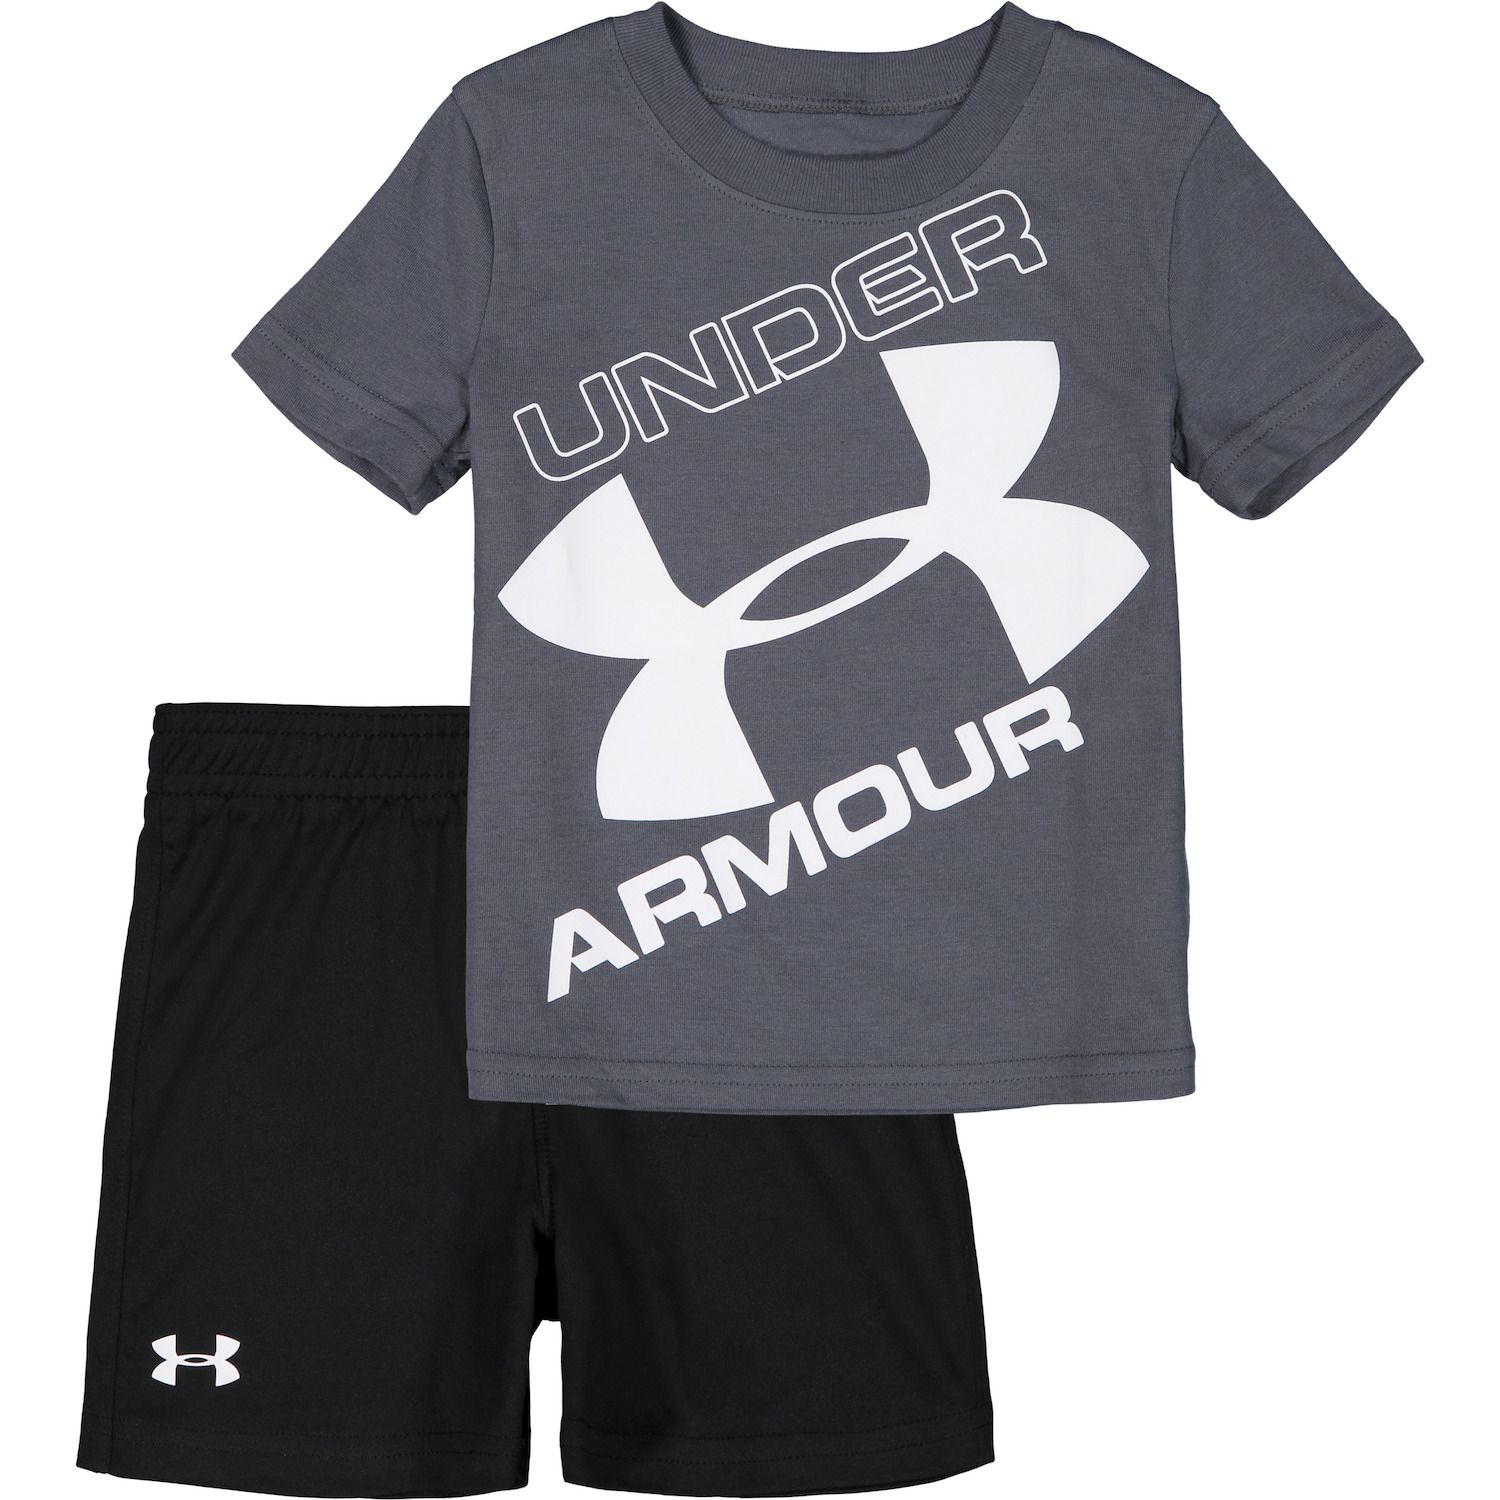 under armour baby clothes